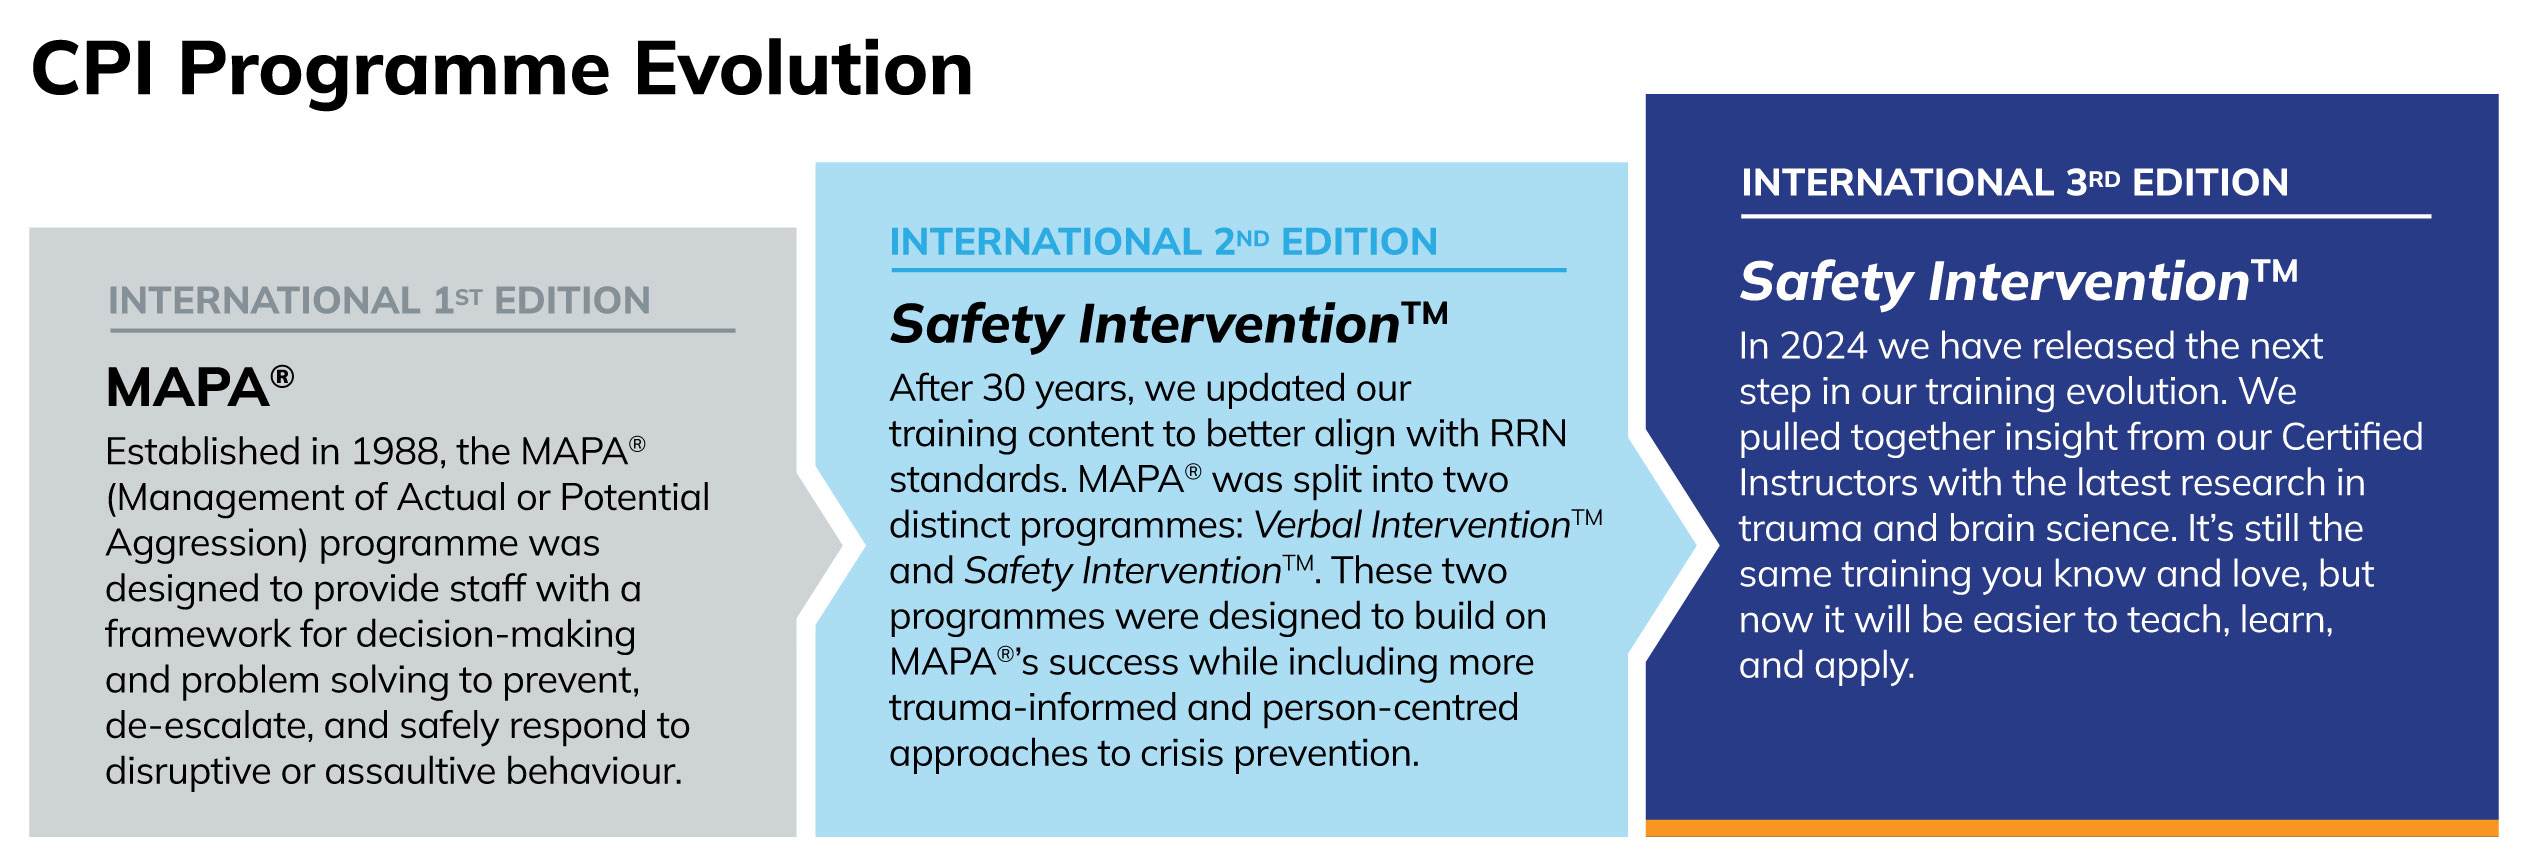 This graphic illustrates the evolution of the training programme MAPA over the years from the 1er edition to the 3rd edition. The programme MAPA became in 2021 Safety Intervention